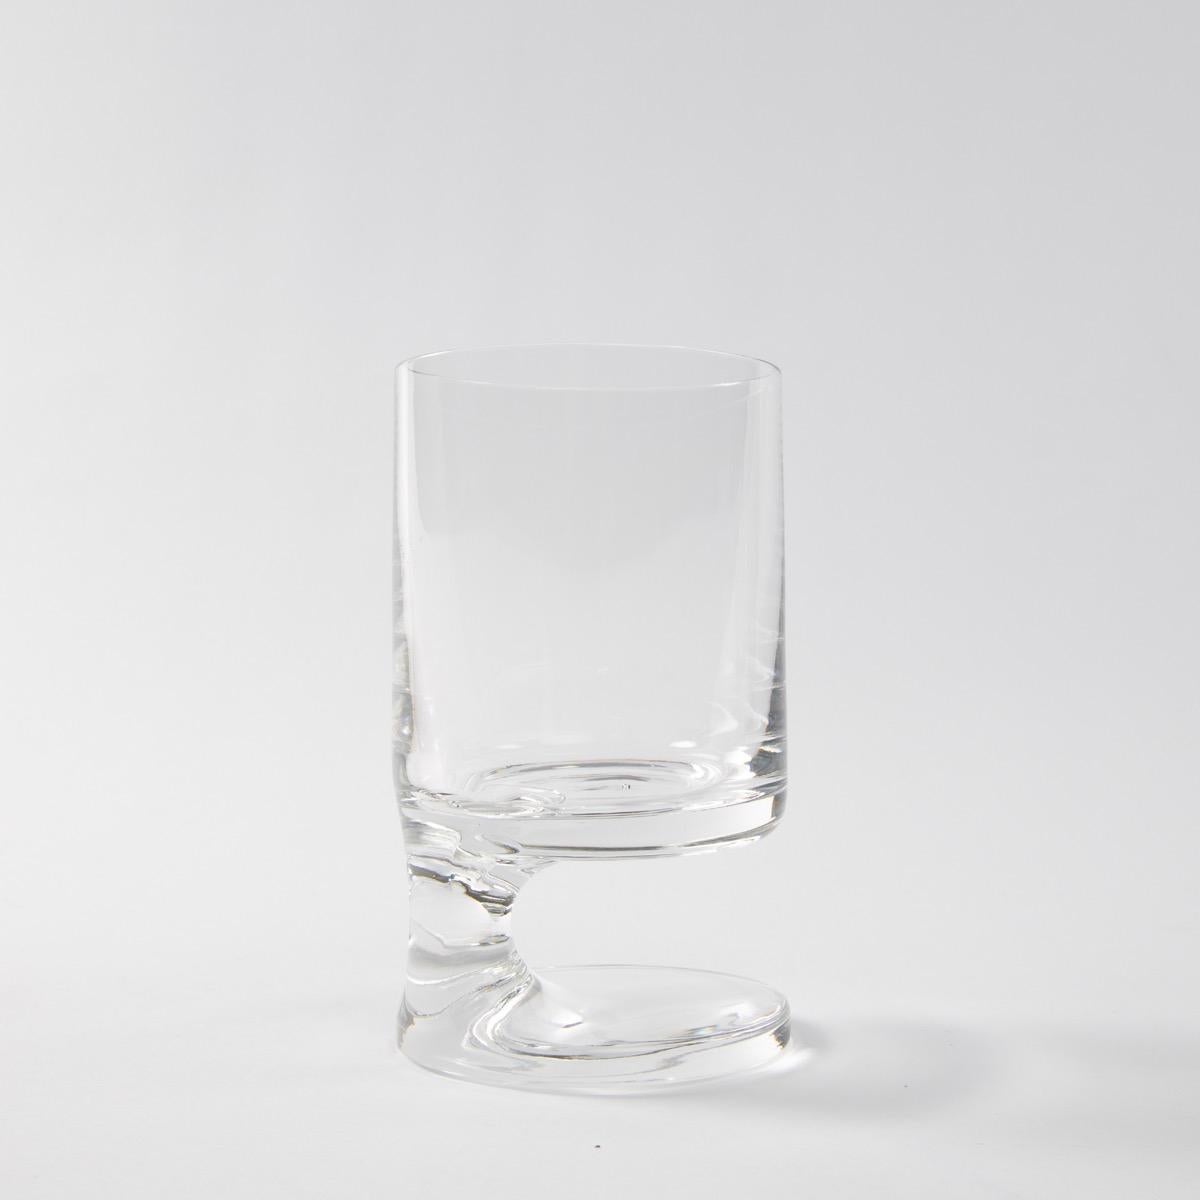 Mid-20th Century Space Age Crystal 1970s Drinking Glasses by Italian Designer Joe Colombo